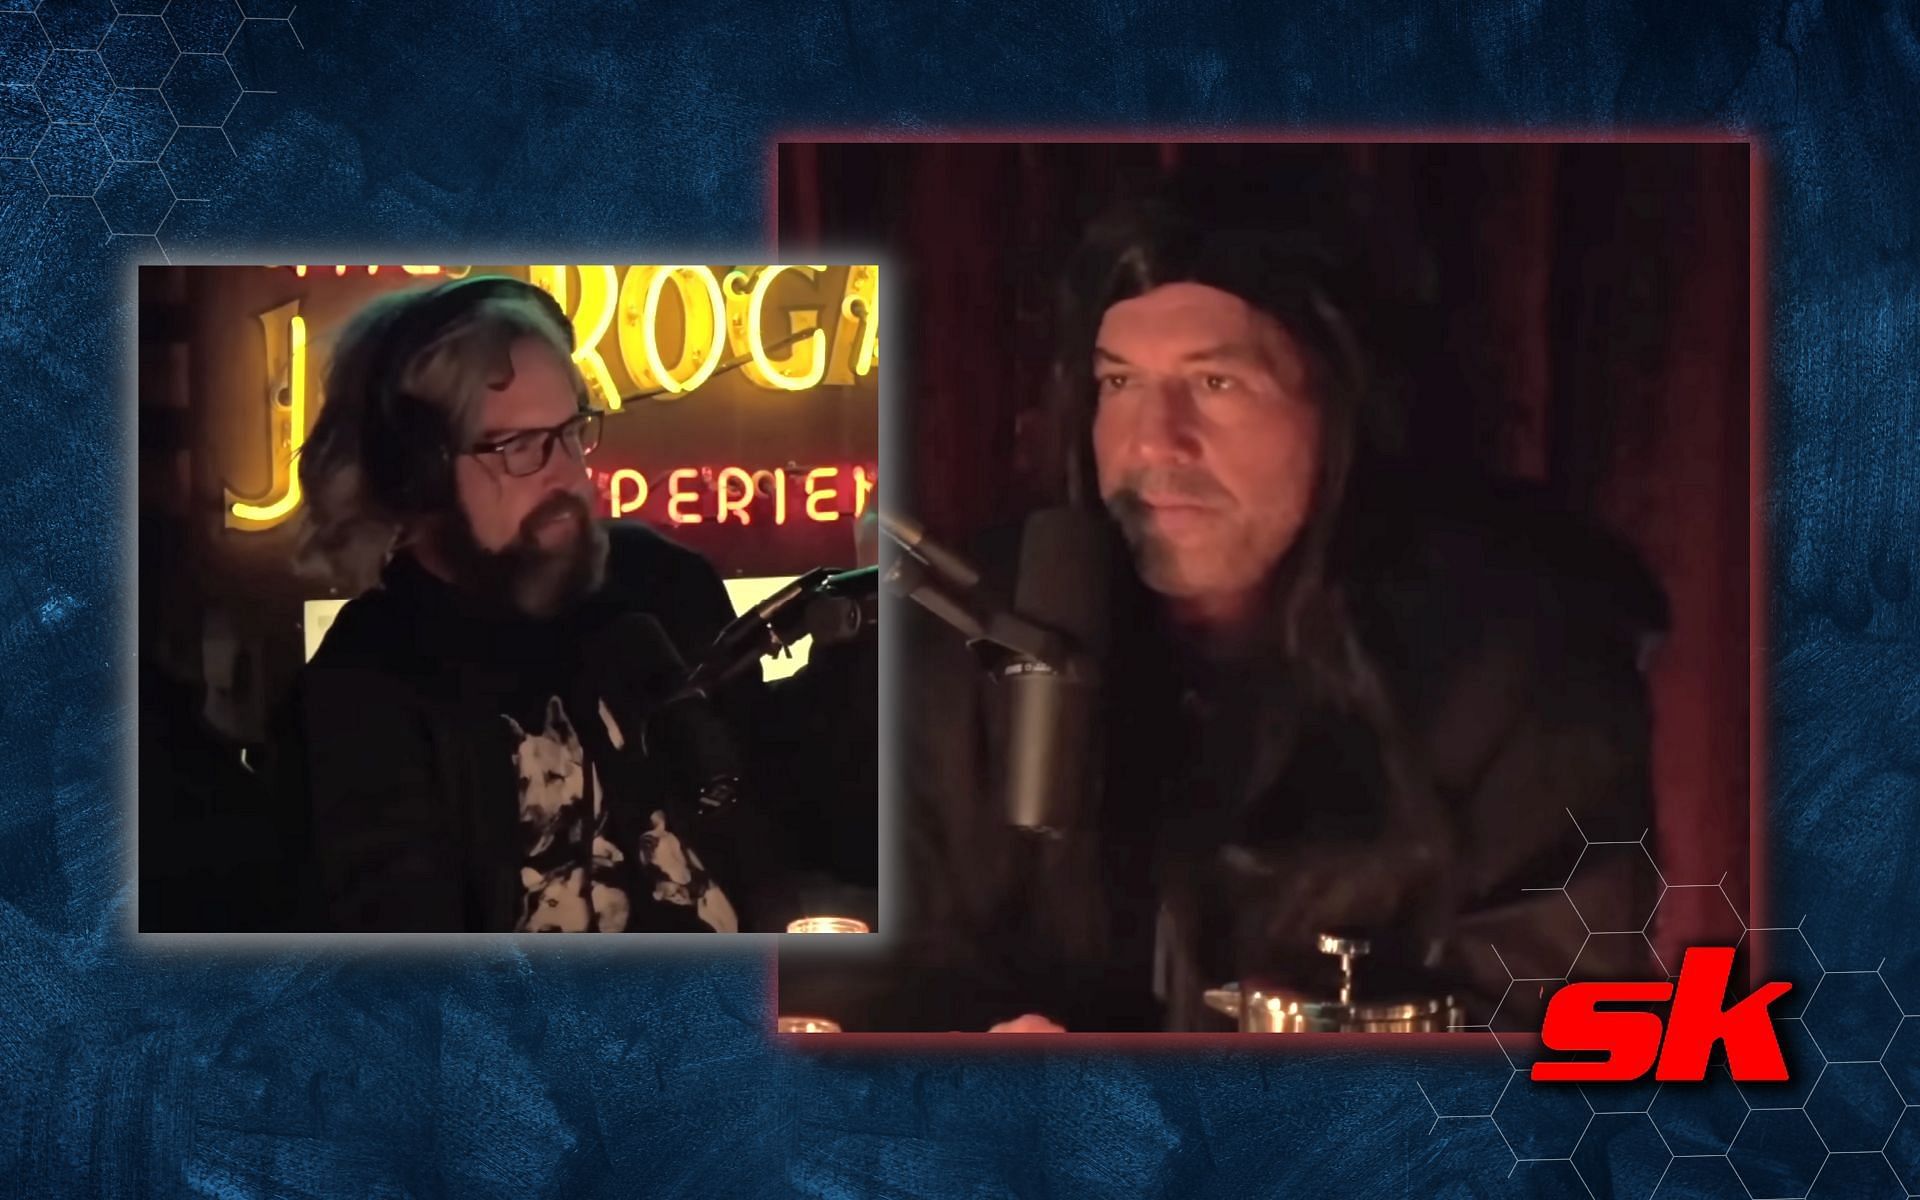 Joe Rogan and Duncan Trussell dress up and discuss crazy extinction theories&quot;. [Image credits: YouTube/JRE&amp;theFam.]